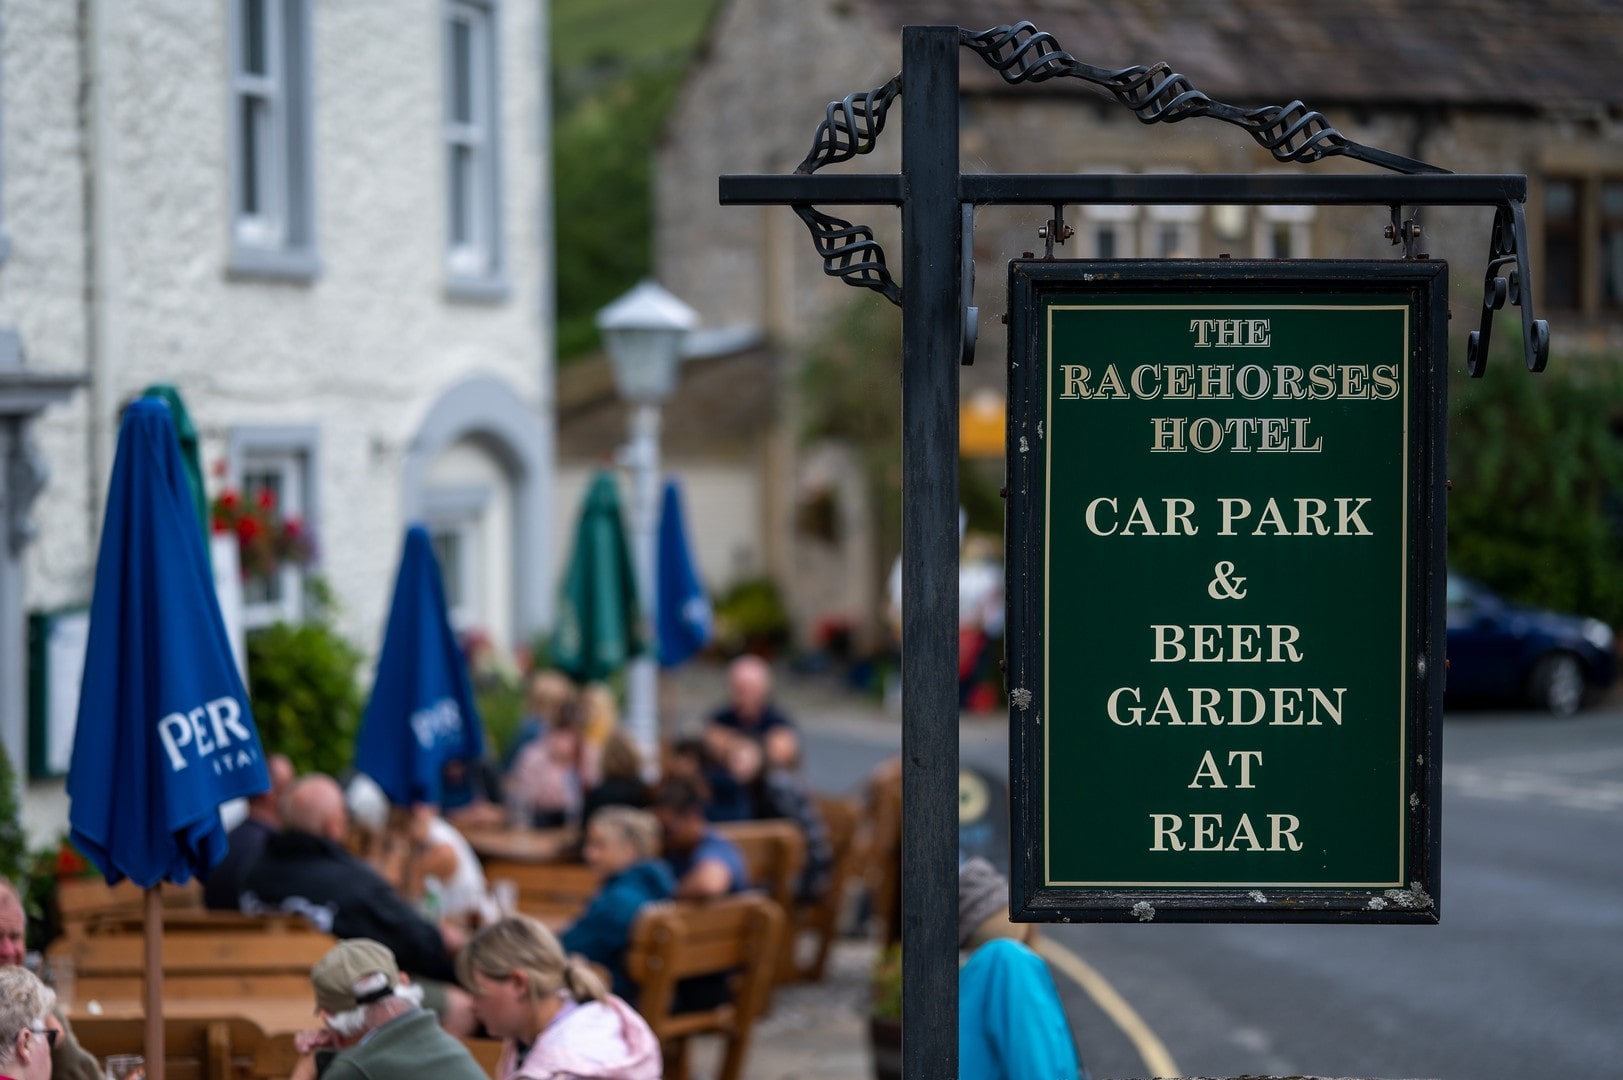 The RaceHorses Hotel